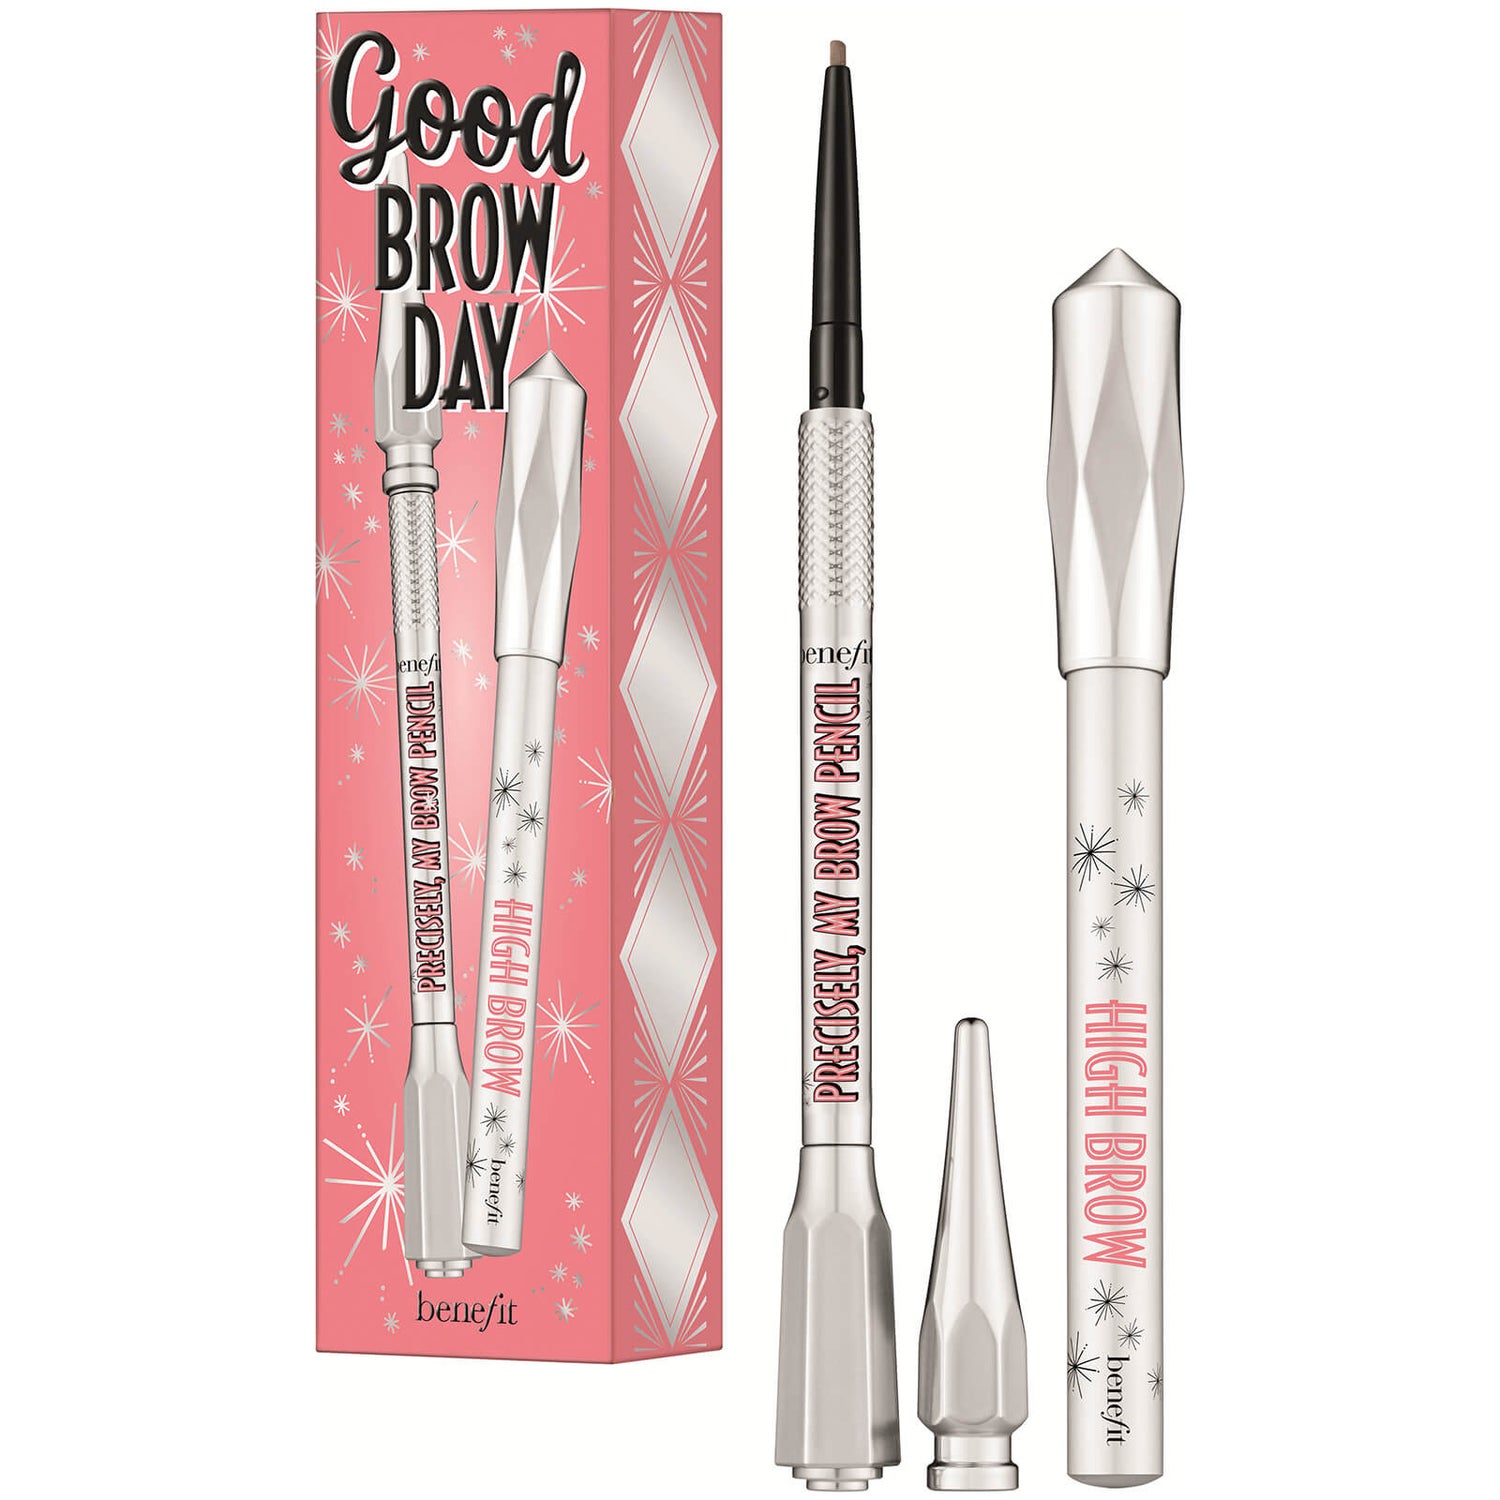 benefit Good Brow Day Brow Defining and Highlighting Pencil Duo 2.88g (Various Shades) (Worth £41.50) - 02 Warm Golden Blonde